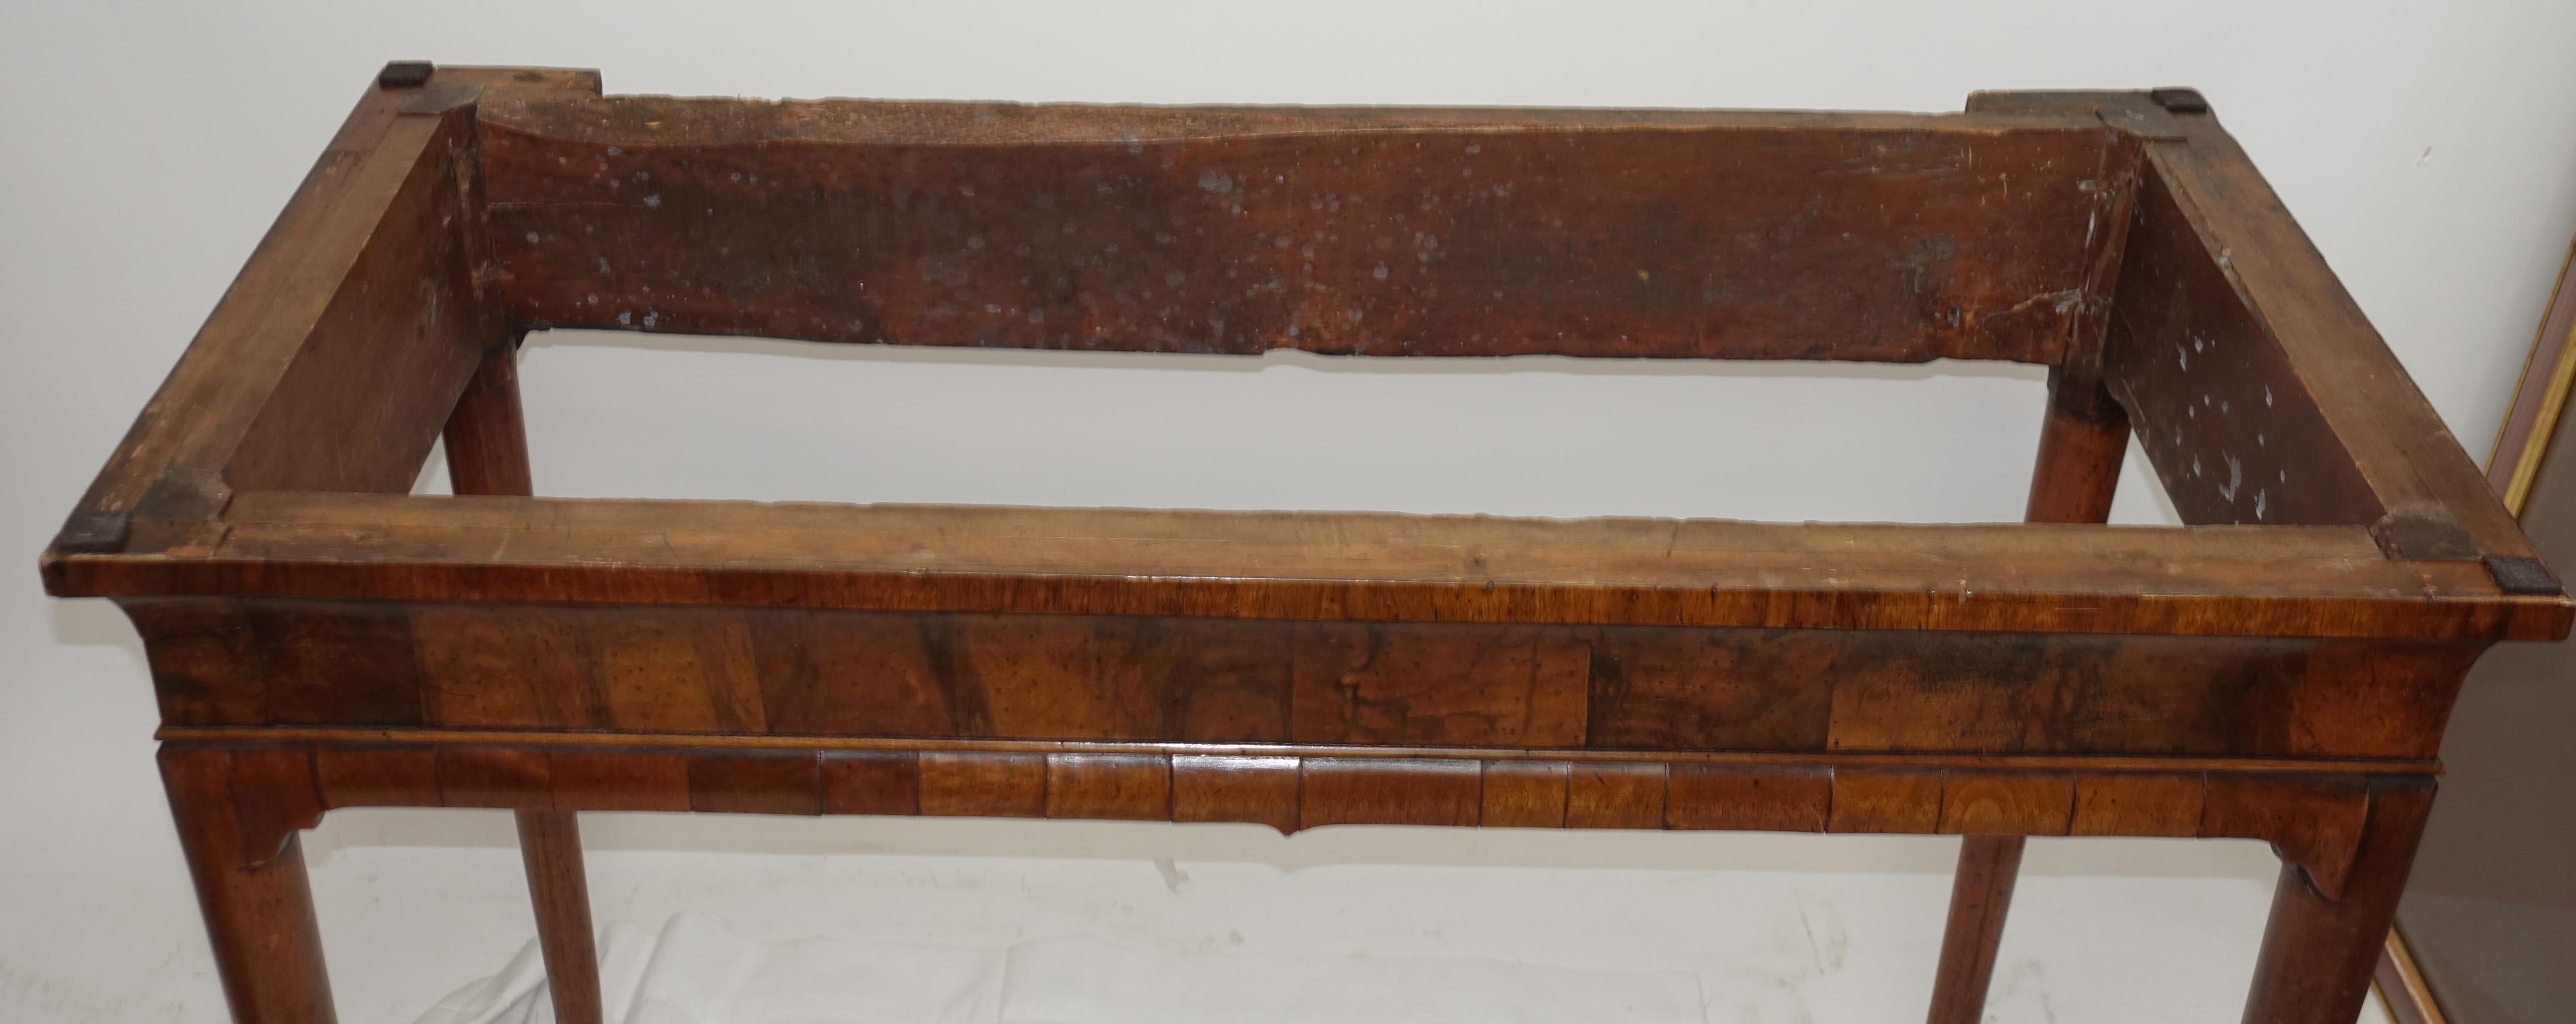 George II Period Walnut Pier / Console Table with Marble Top For Sale 4